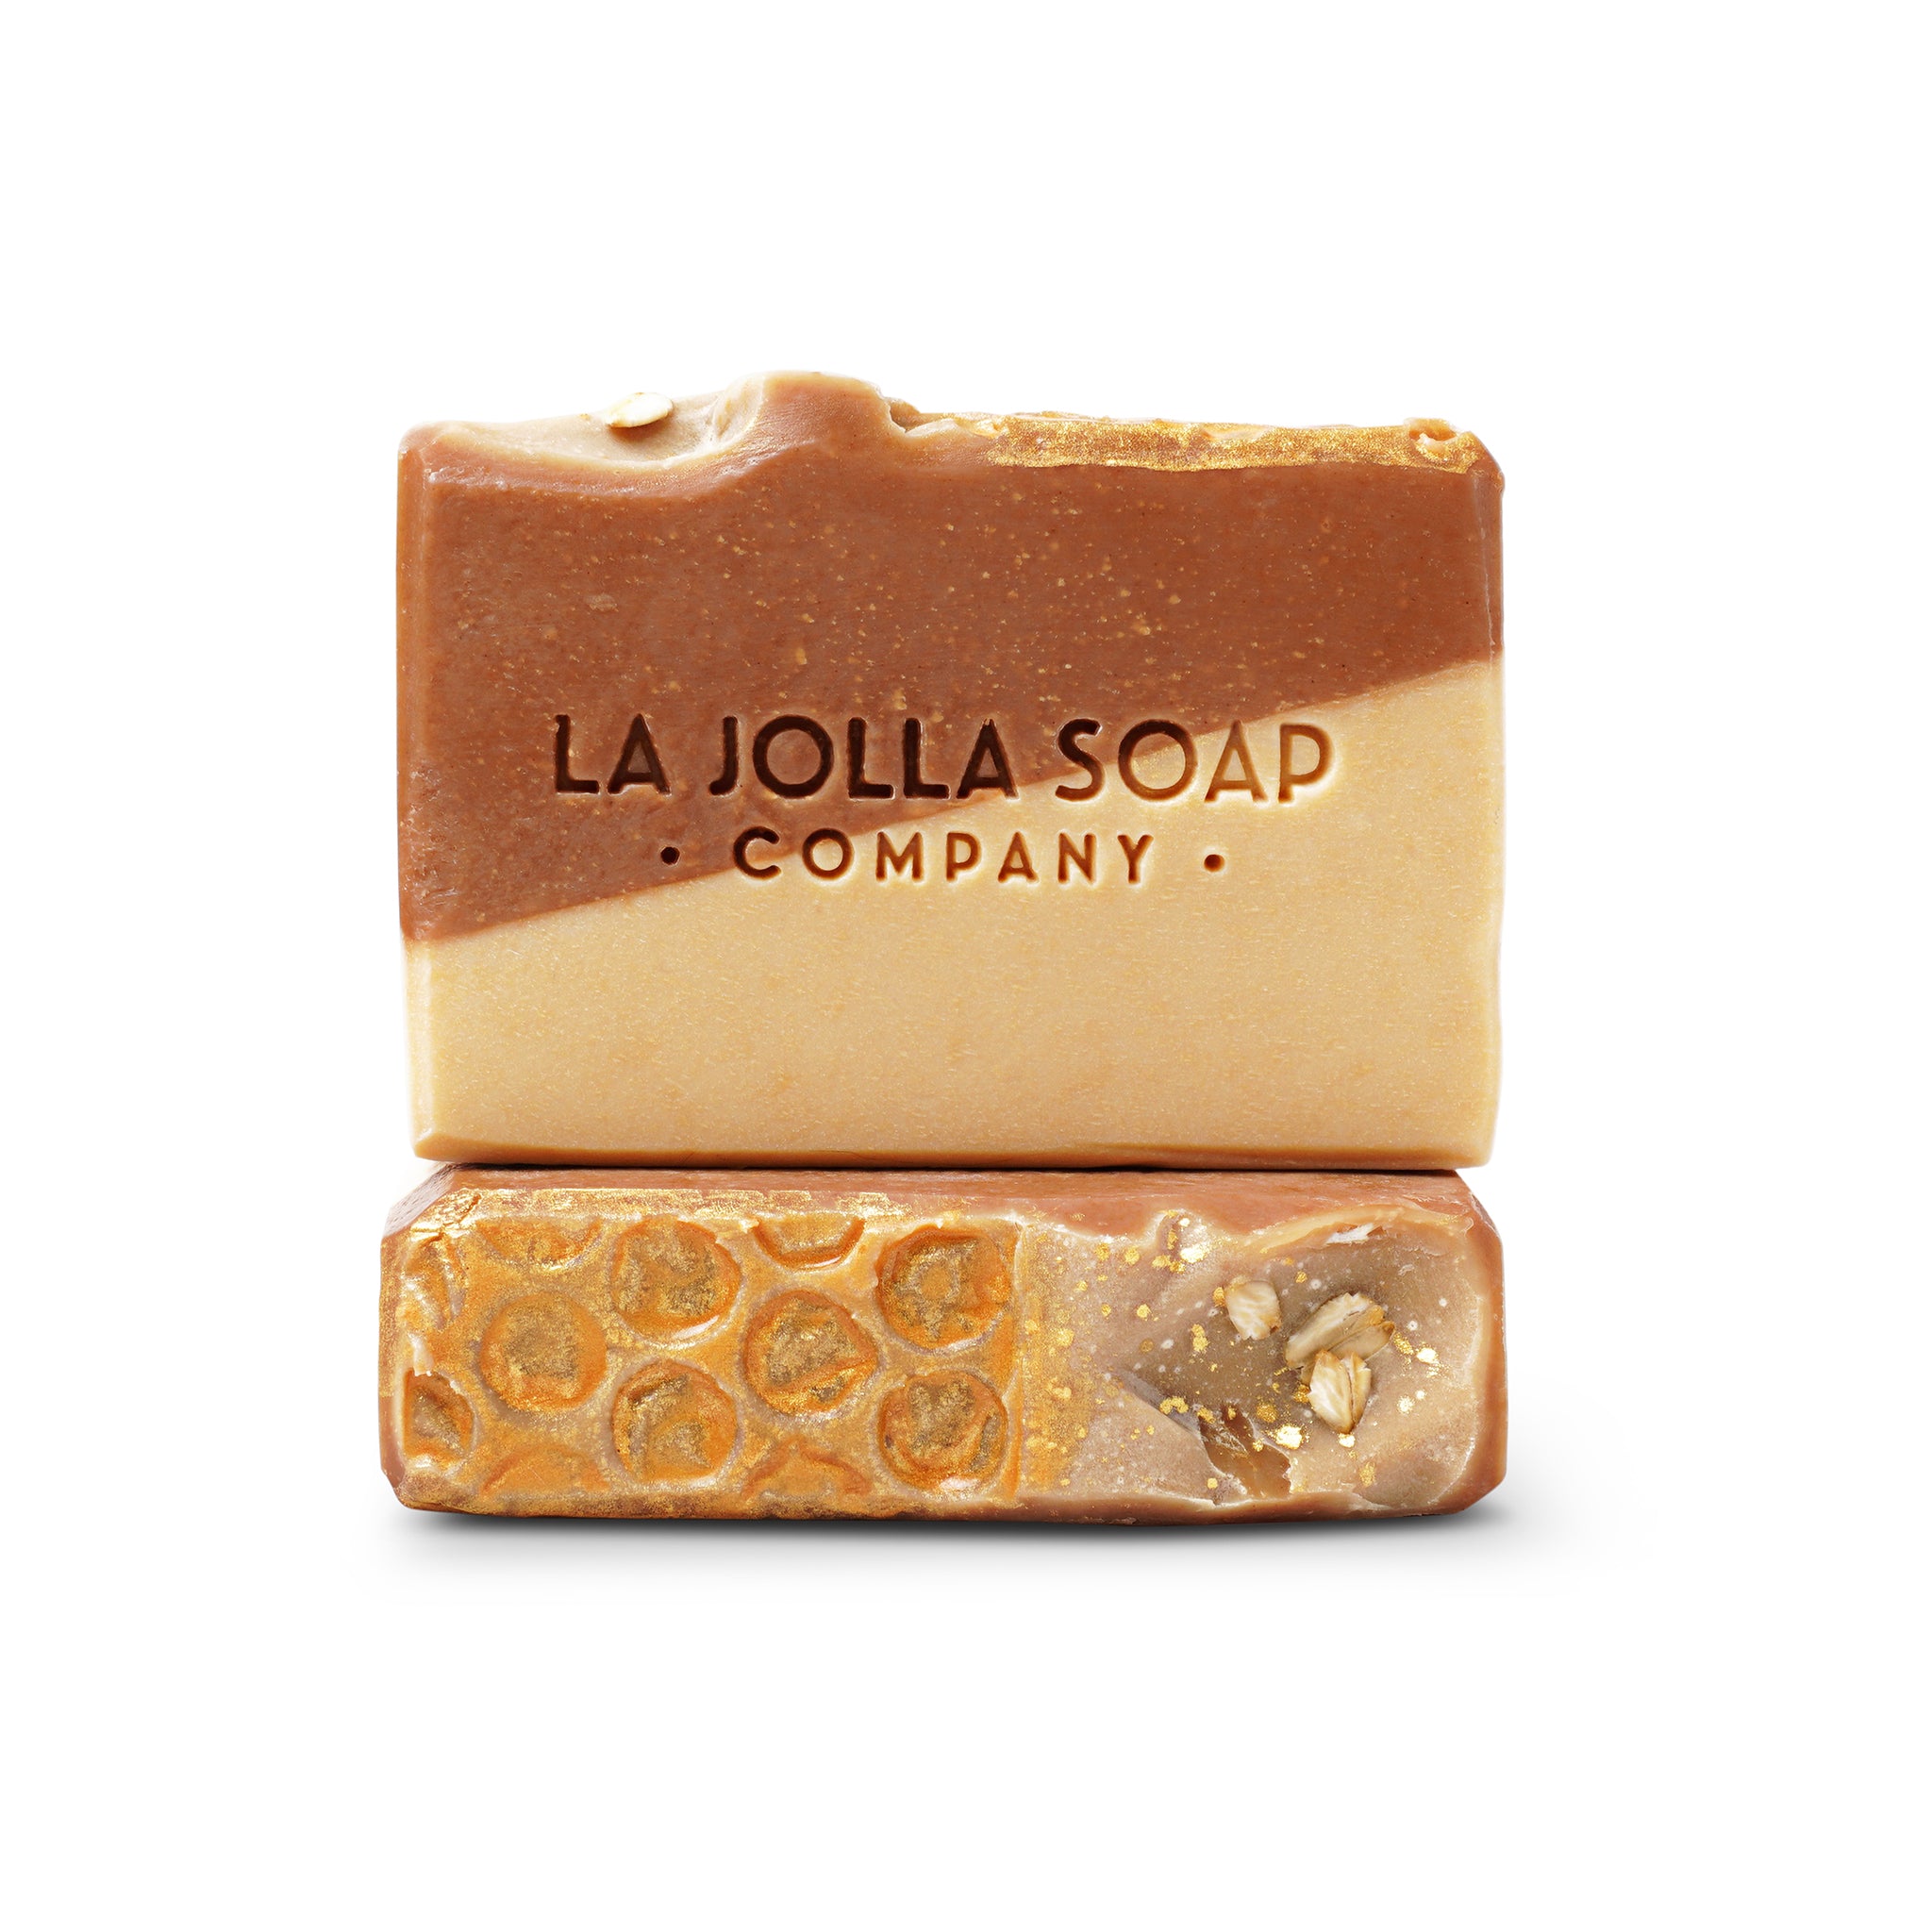 La Jolla Soap Company - Goat Milk and Honey. This Artisan Soap is made with real organic Goat milk-high in vitamins, minerals and alpha hydroxy acids which helps to gently exfoliate dead skin cells while nourishing your skin. Enriched with organic honey, oat flour and oat extract for some extra skin soothing goodness.  The lather is smooth and creamy.